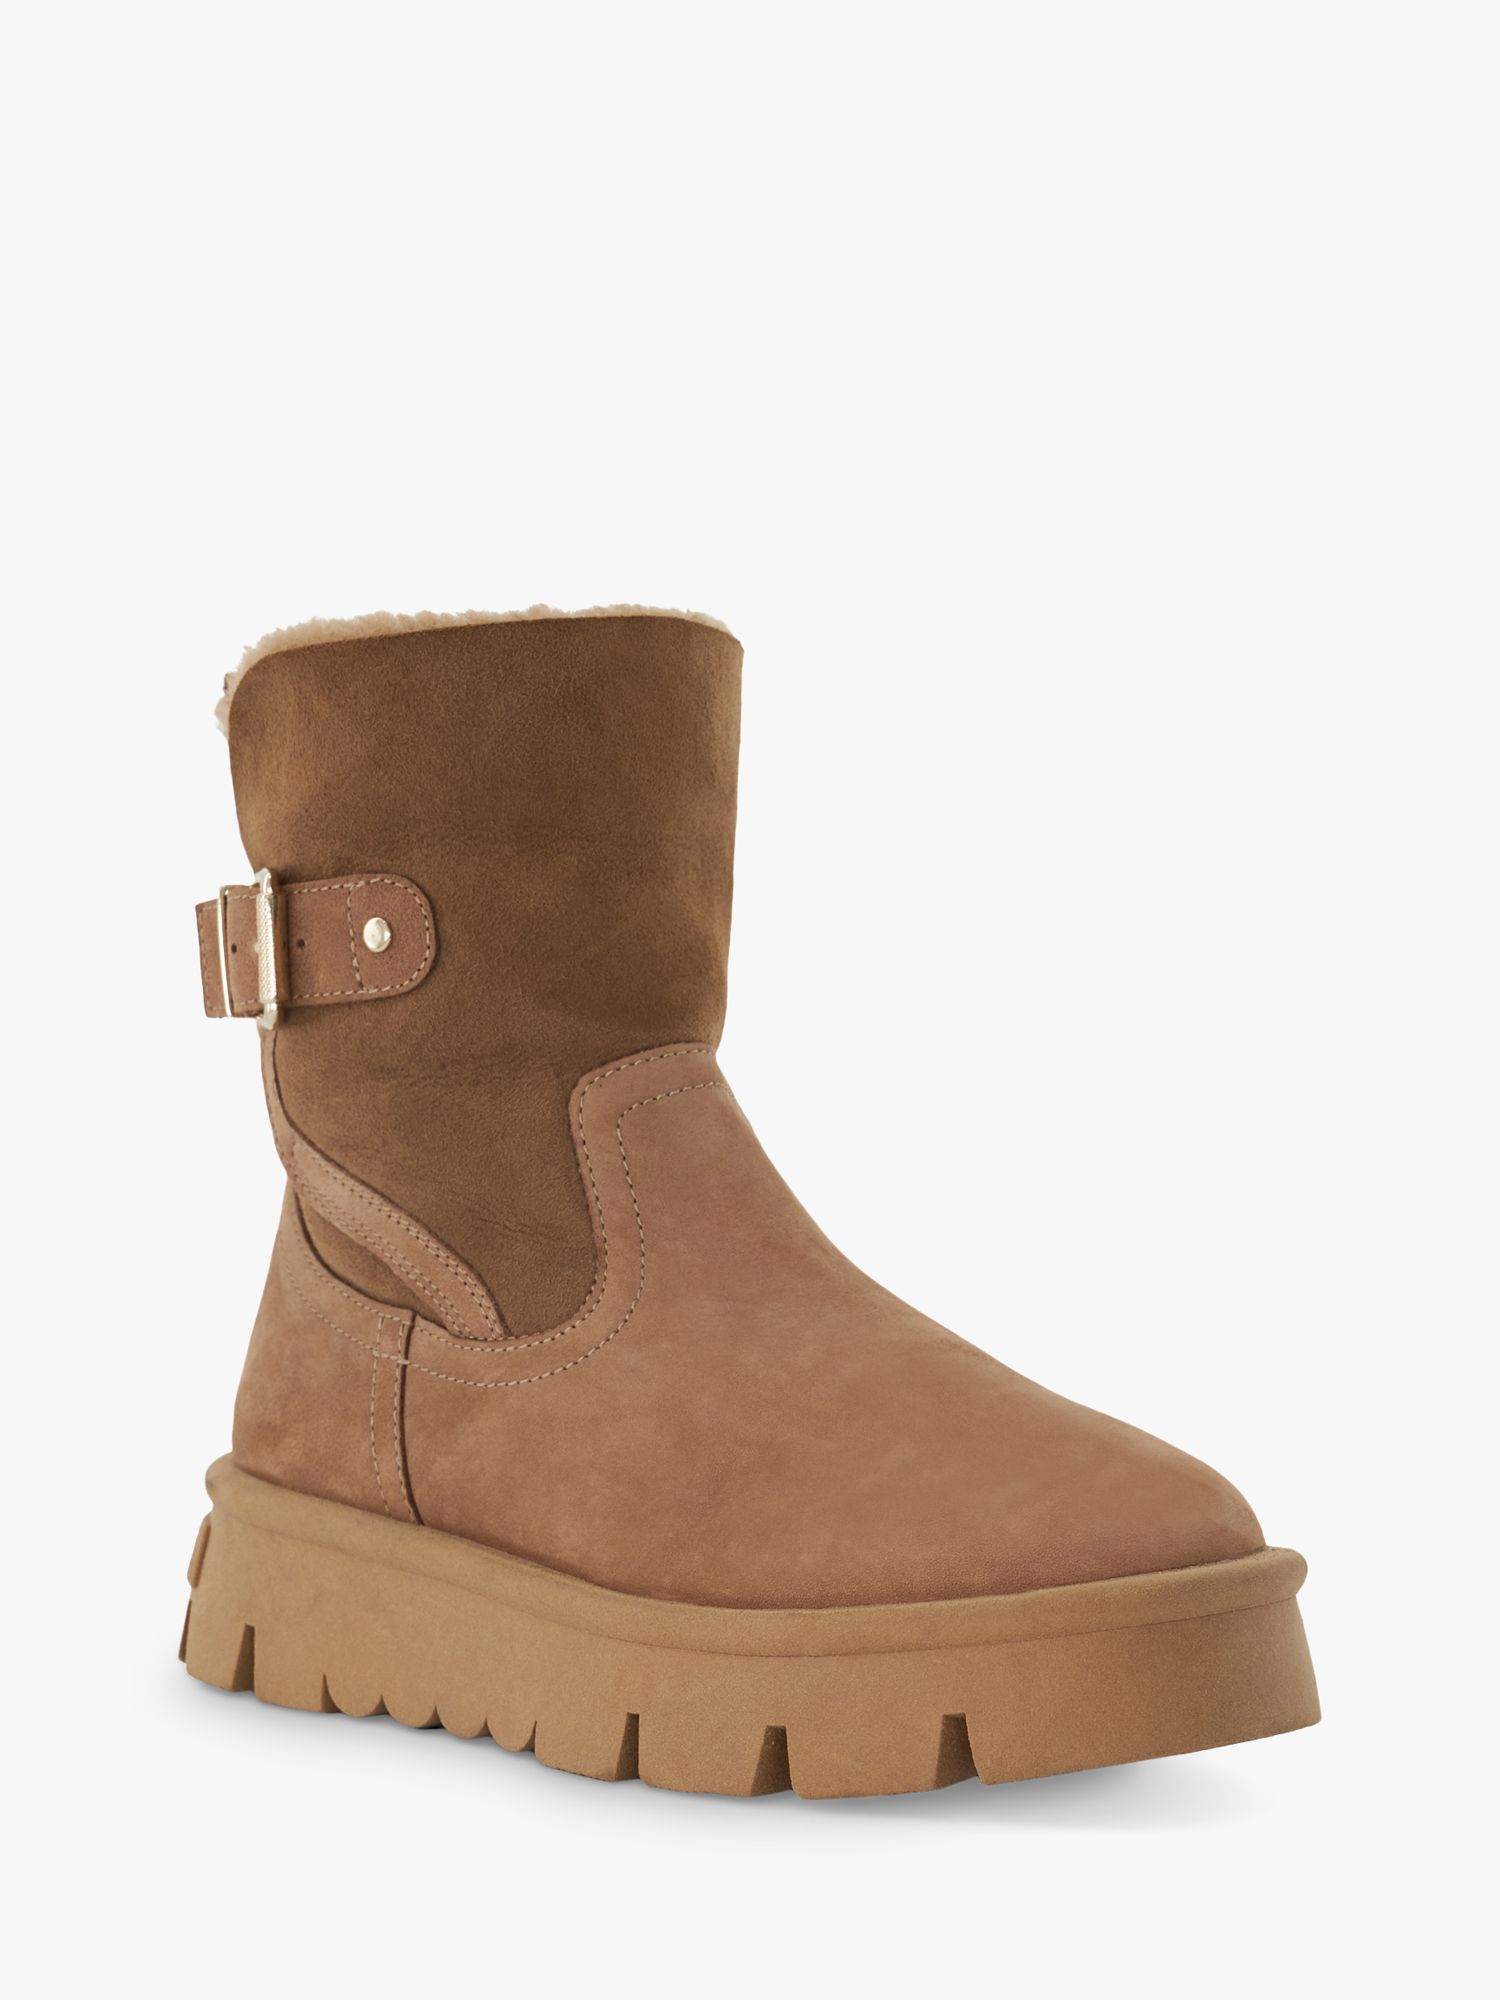 Buy Dune Pheebs Suede Ankle Boots Online at johnlewis.com